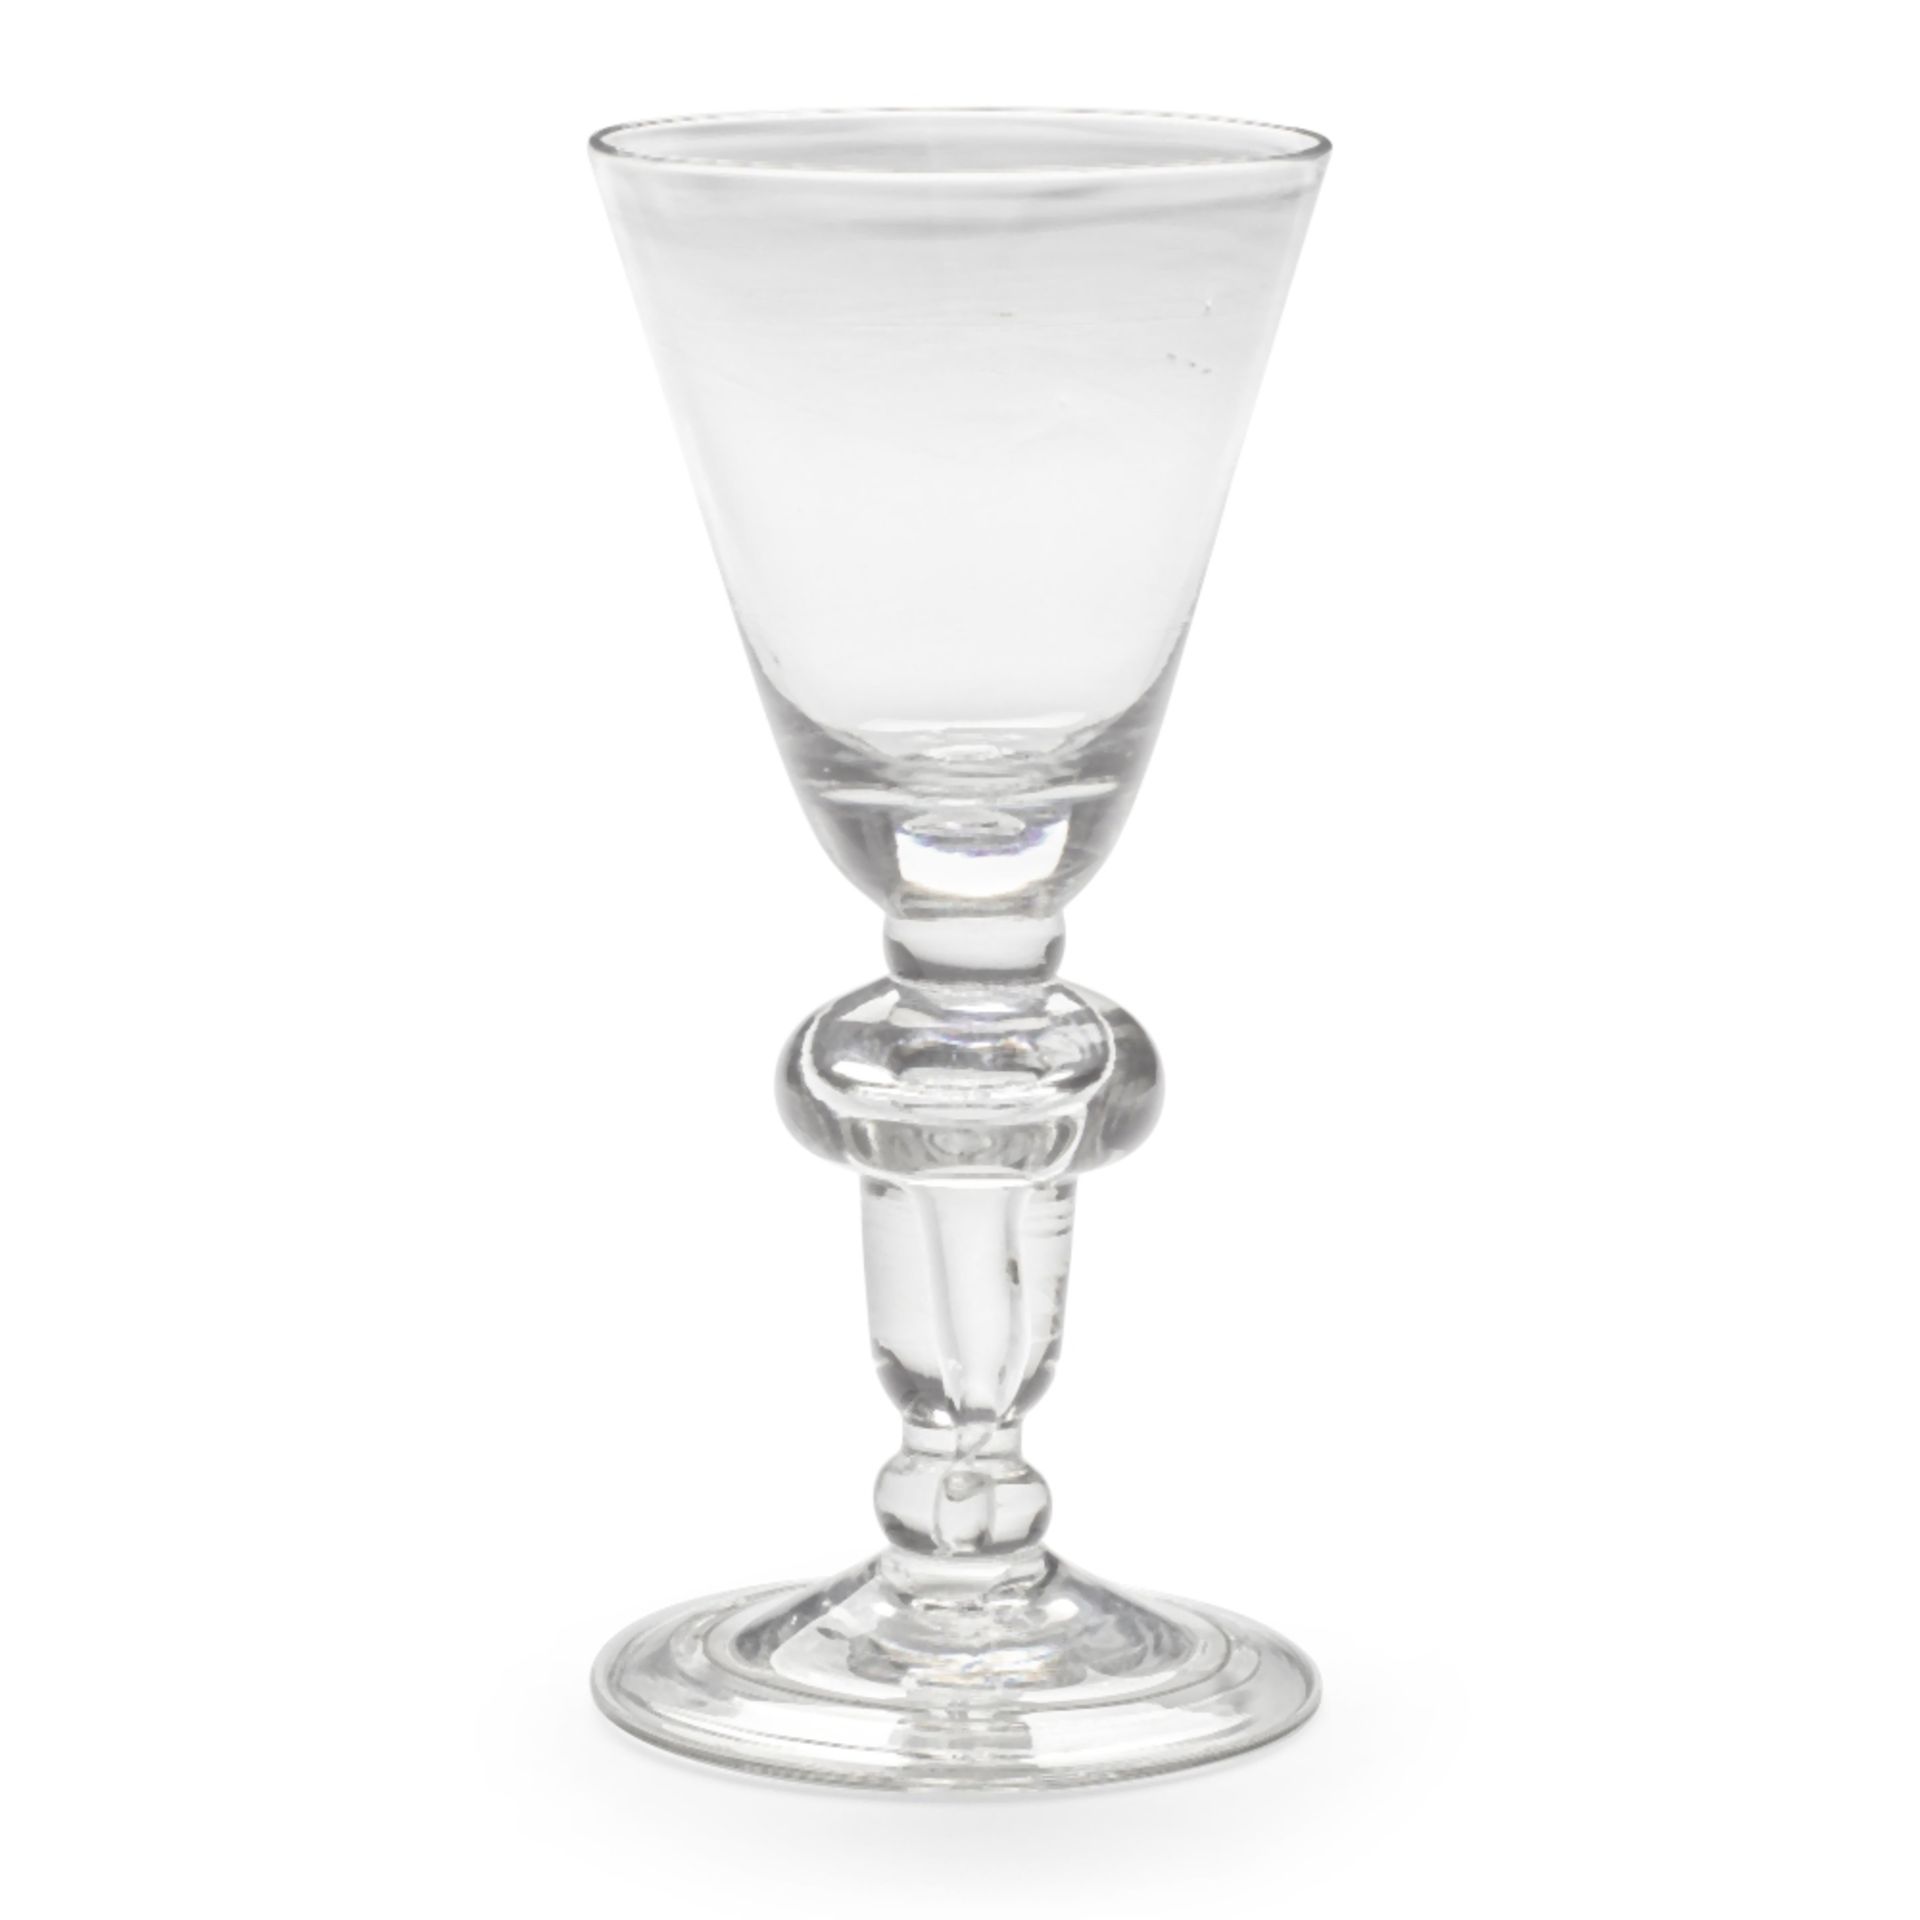 A fine acorn-knopped heavy baluster goblet, circa 1710-15